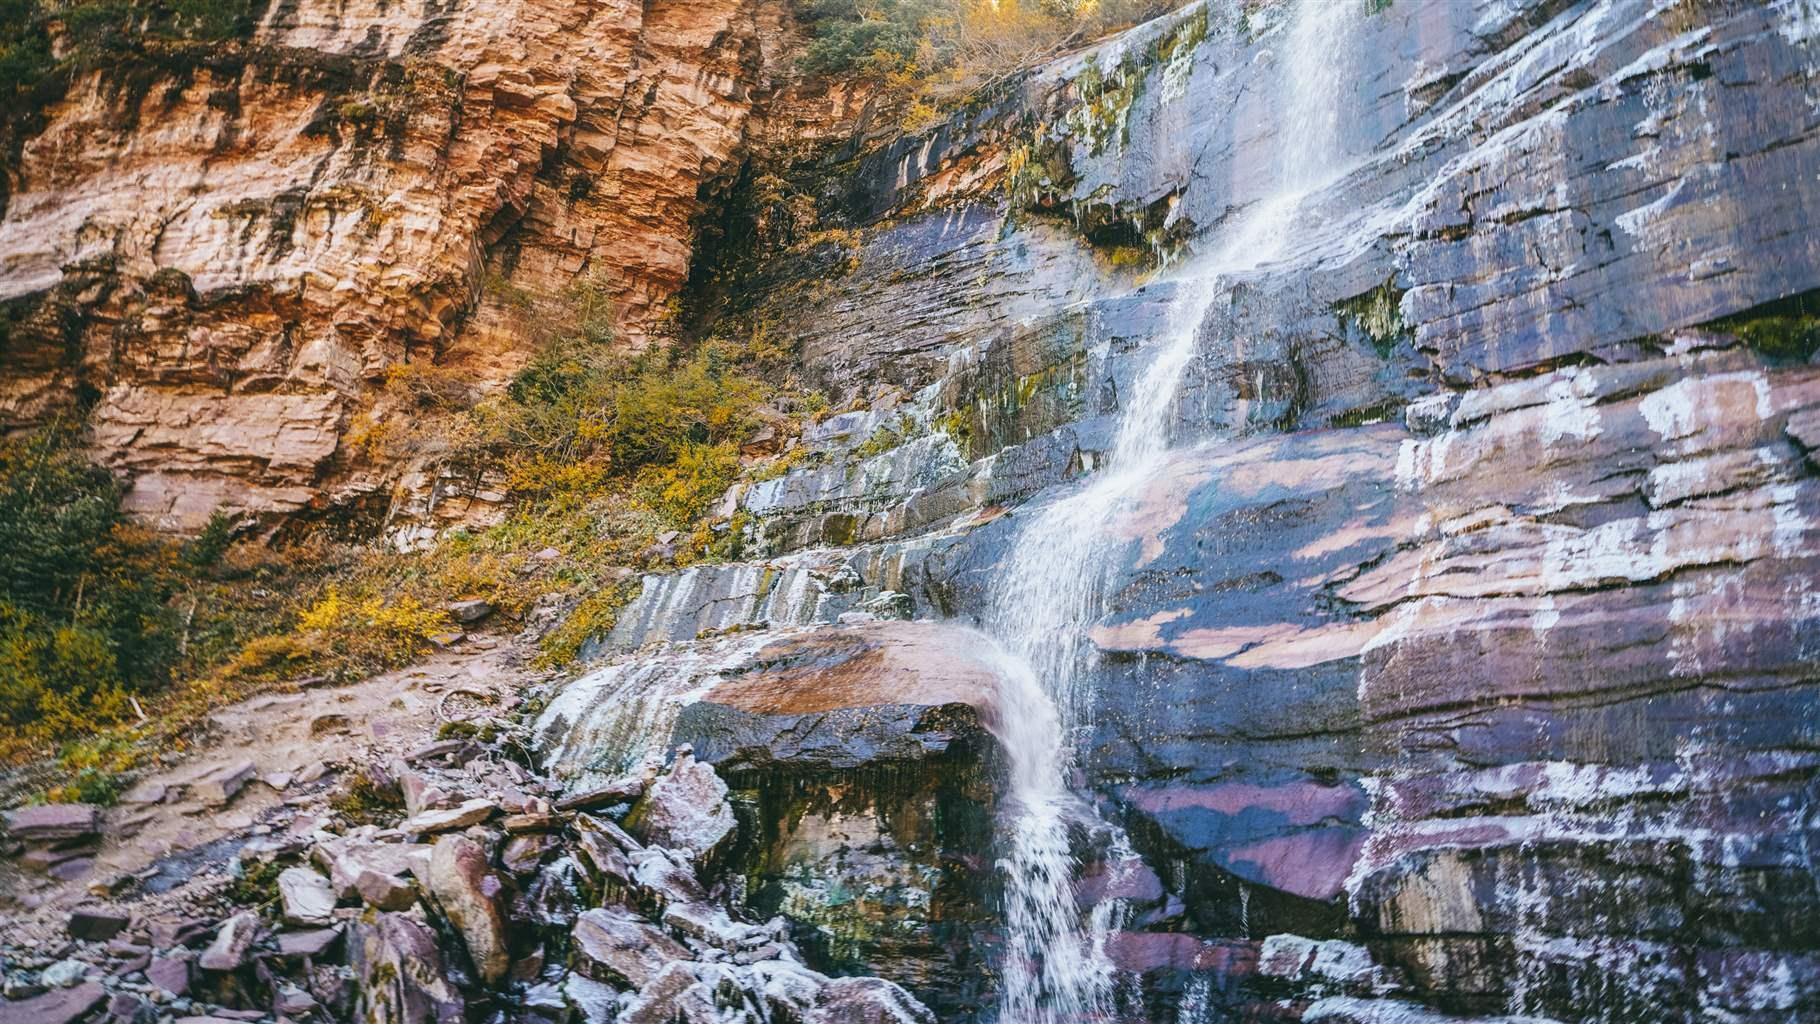 Bear Creek Falls (above) near Telluride, is a popular hiking destination, while the creek is a source of drinking water for local 